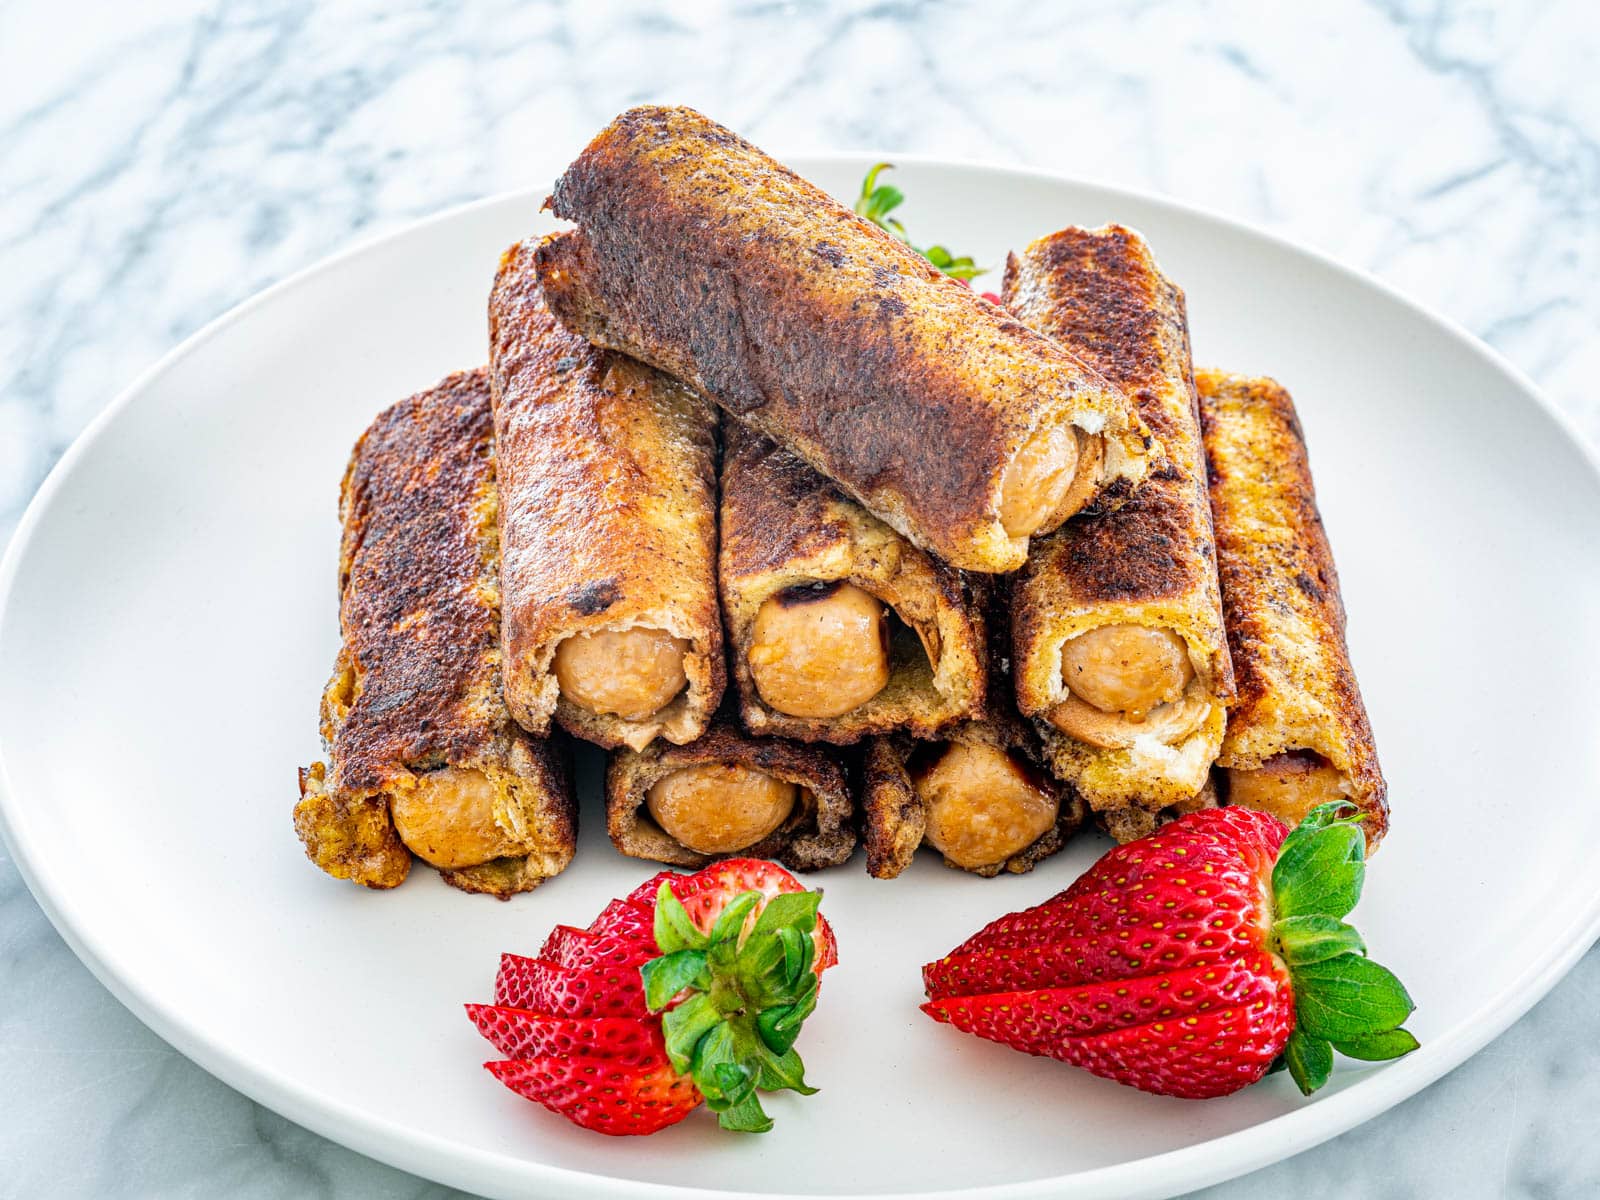 Sausage French Toast Roll Ups on a white plate garnished with strawberries